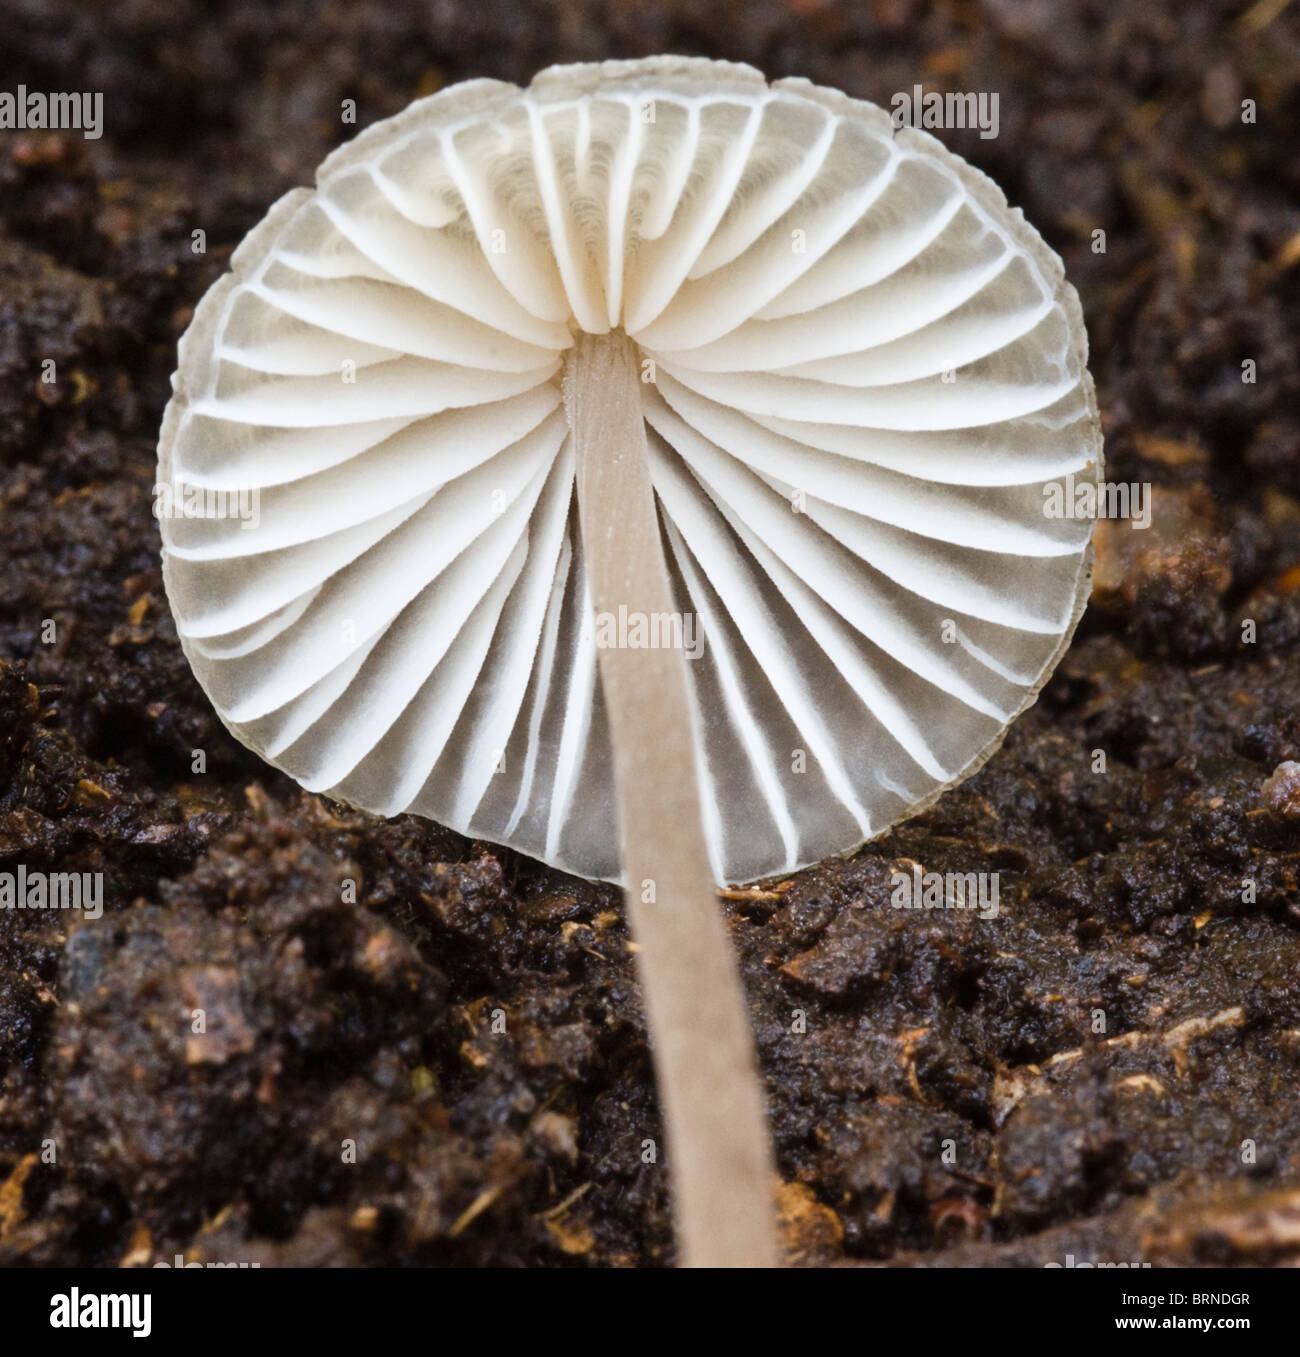 Underside of fungus showing gills and stem Stock Photo